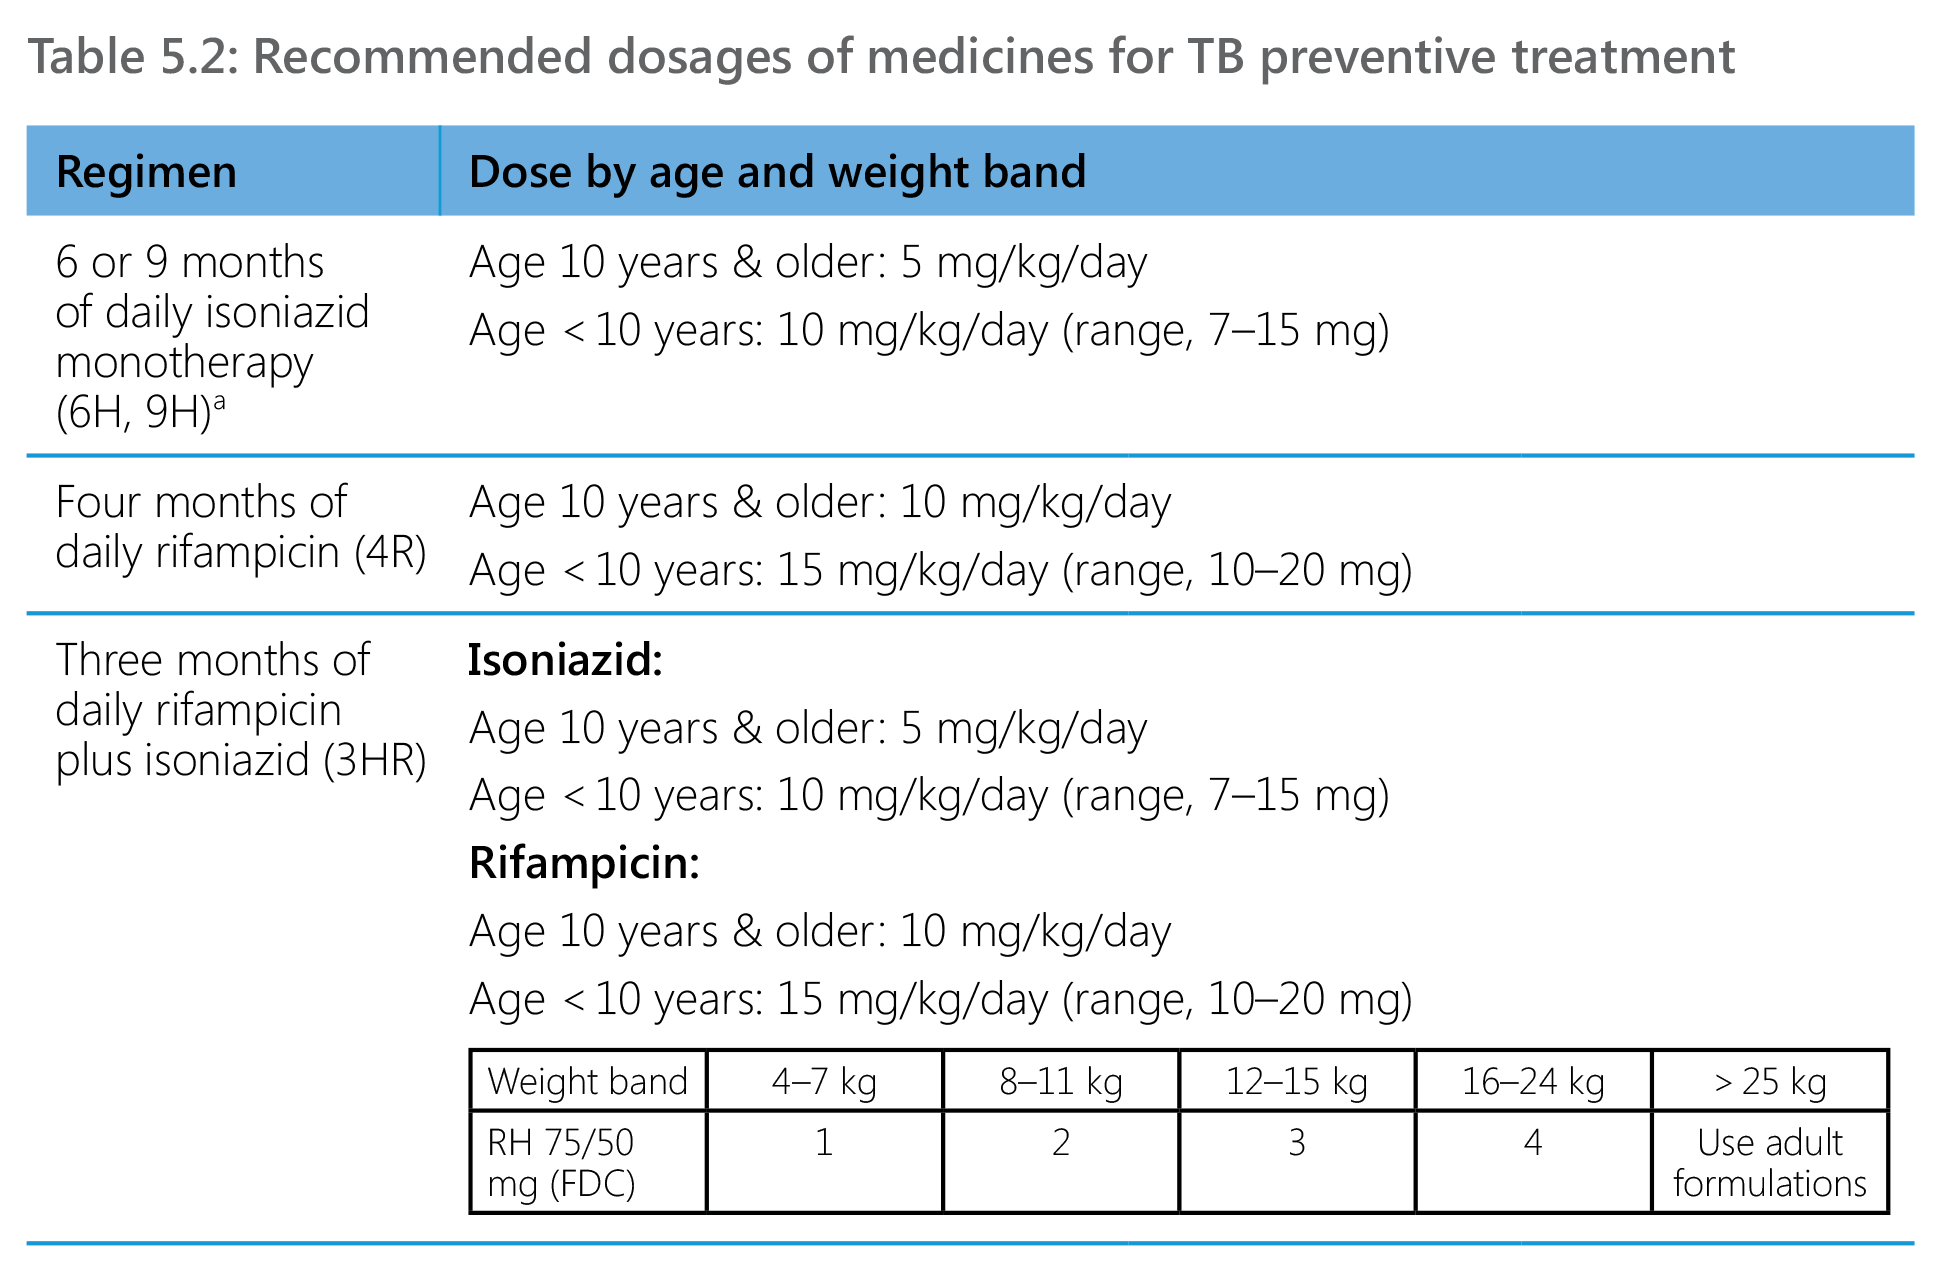 dosages of medicines for TB